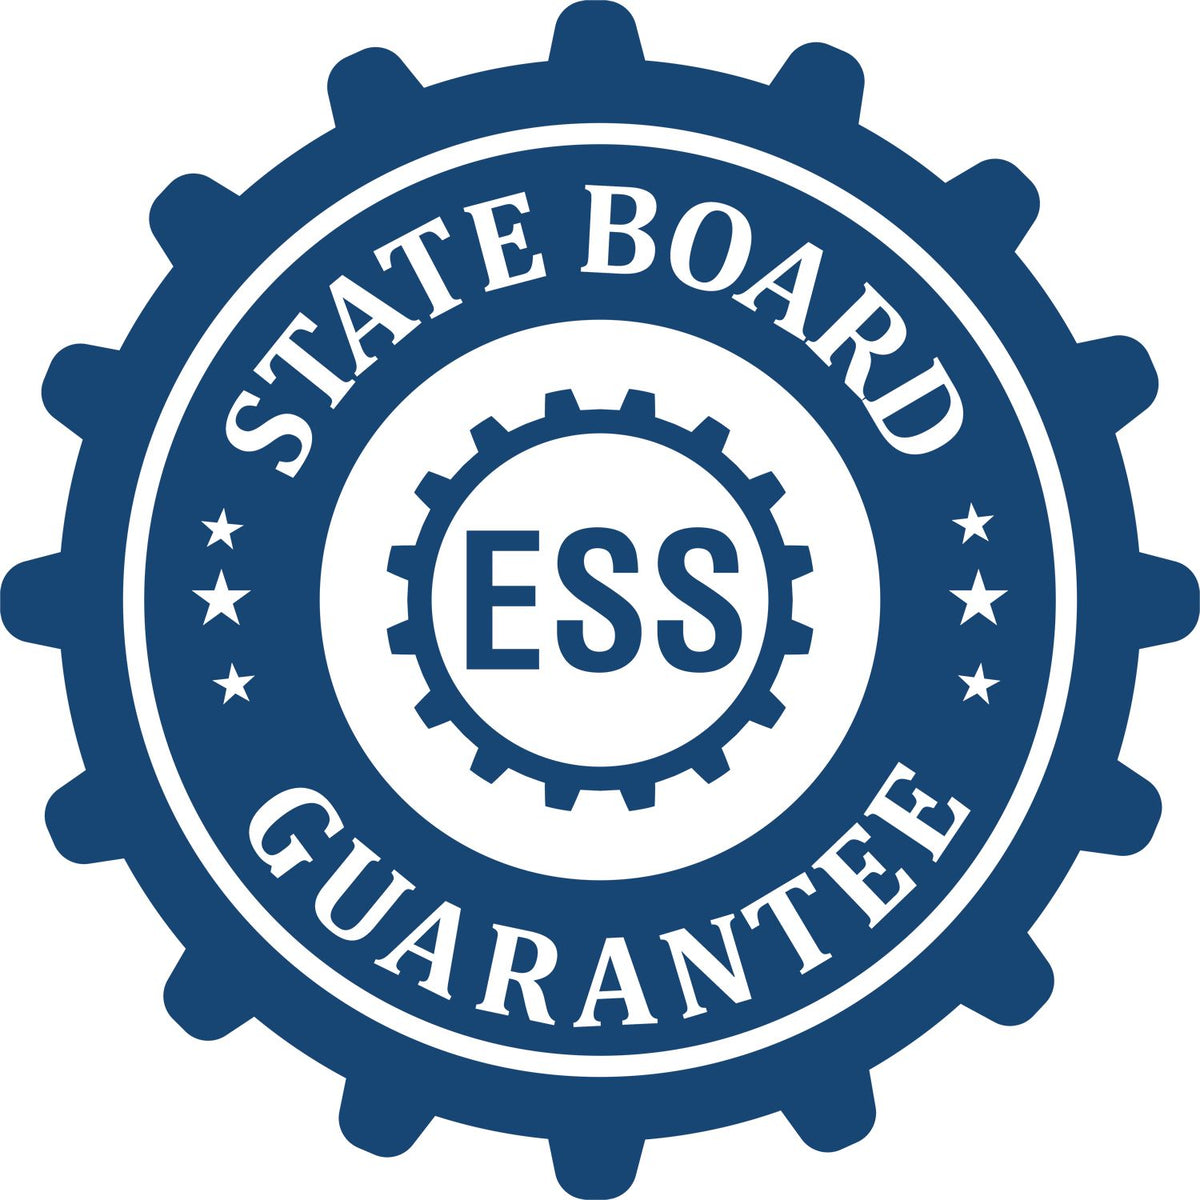 An emblem in a gear shape illustrating a state board guarantee for the Hybrid Delaware Architect Seal